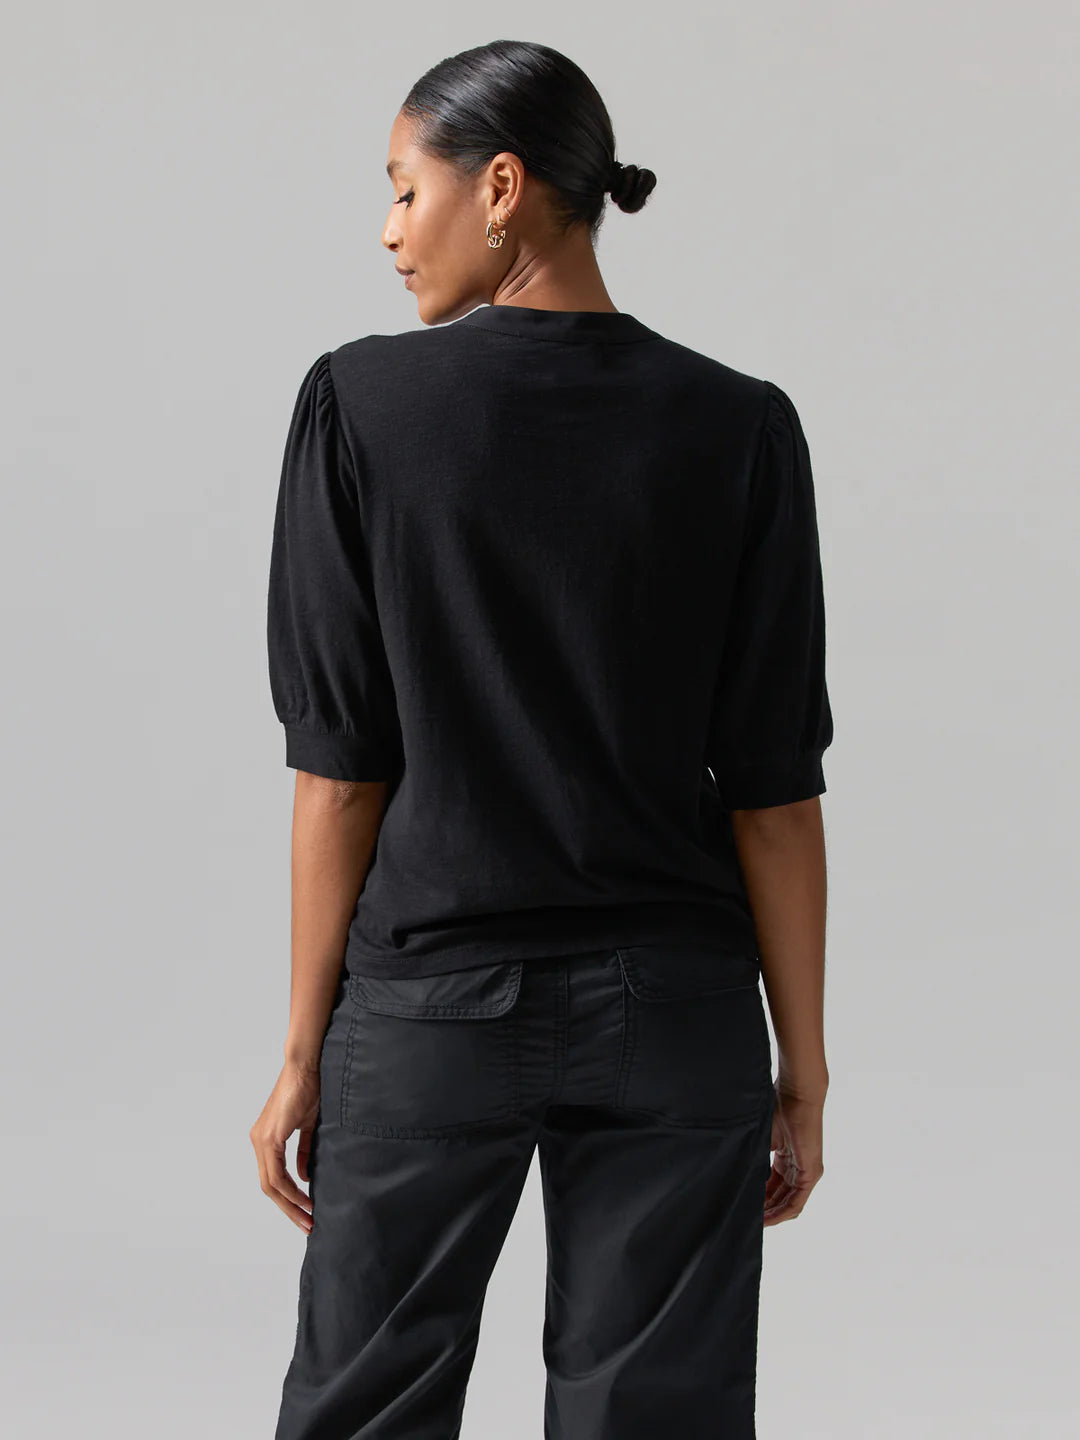 Black 3/4 Sleeve Top Apex Ethical Boutique